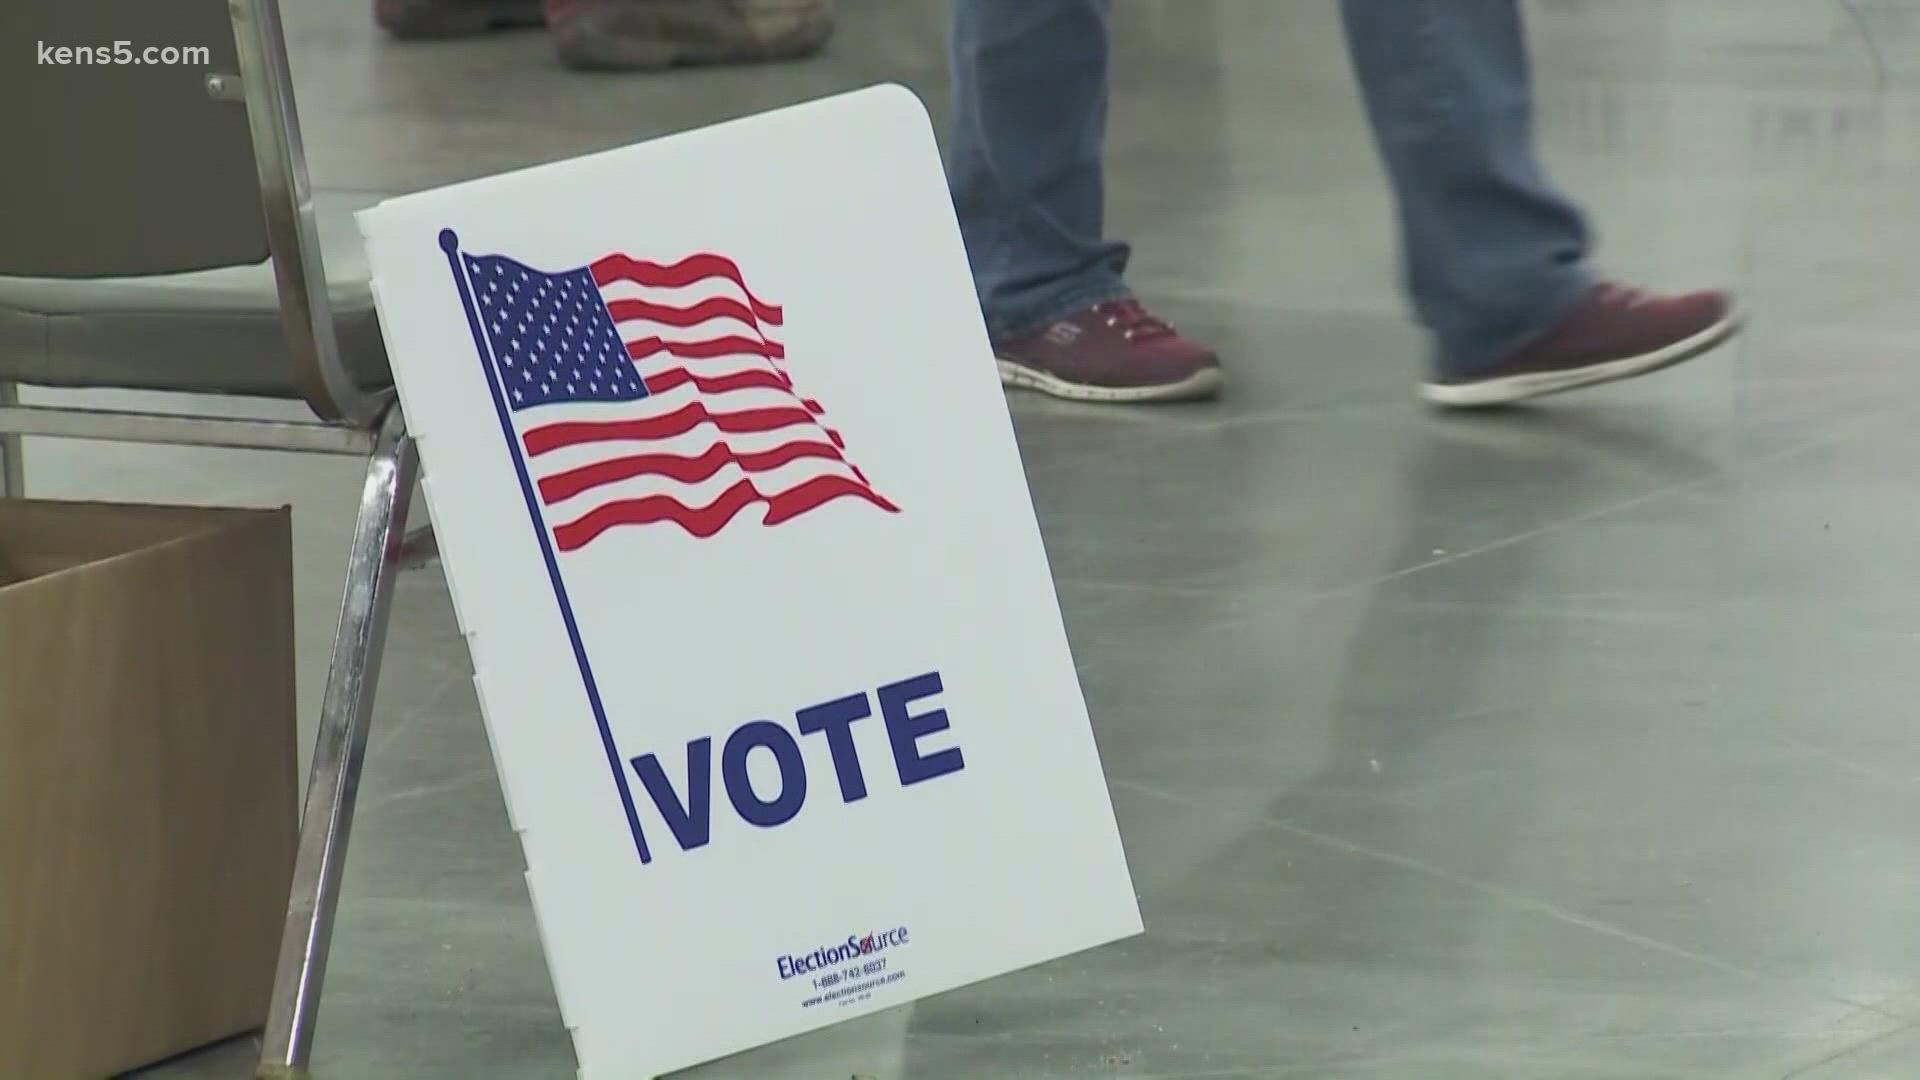 From voter registration questions to explaining how to cast your vote, here's the latest information about the upcoming election in San Antonio and Texas.